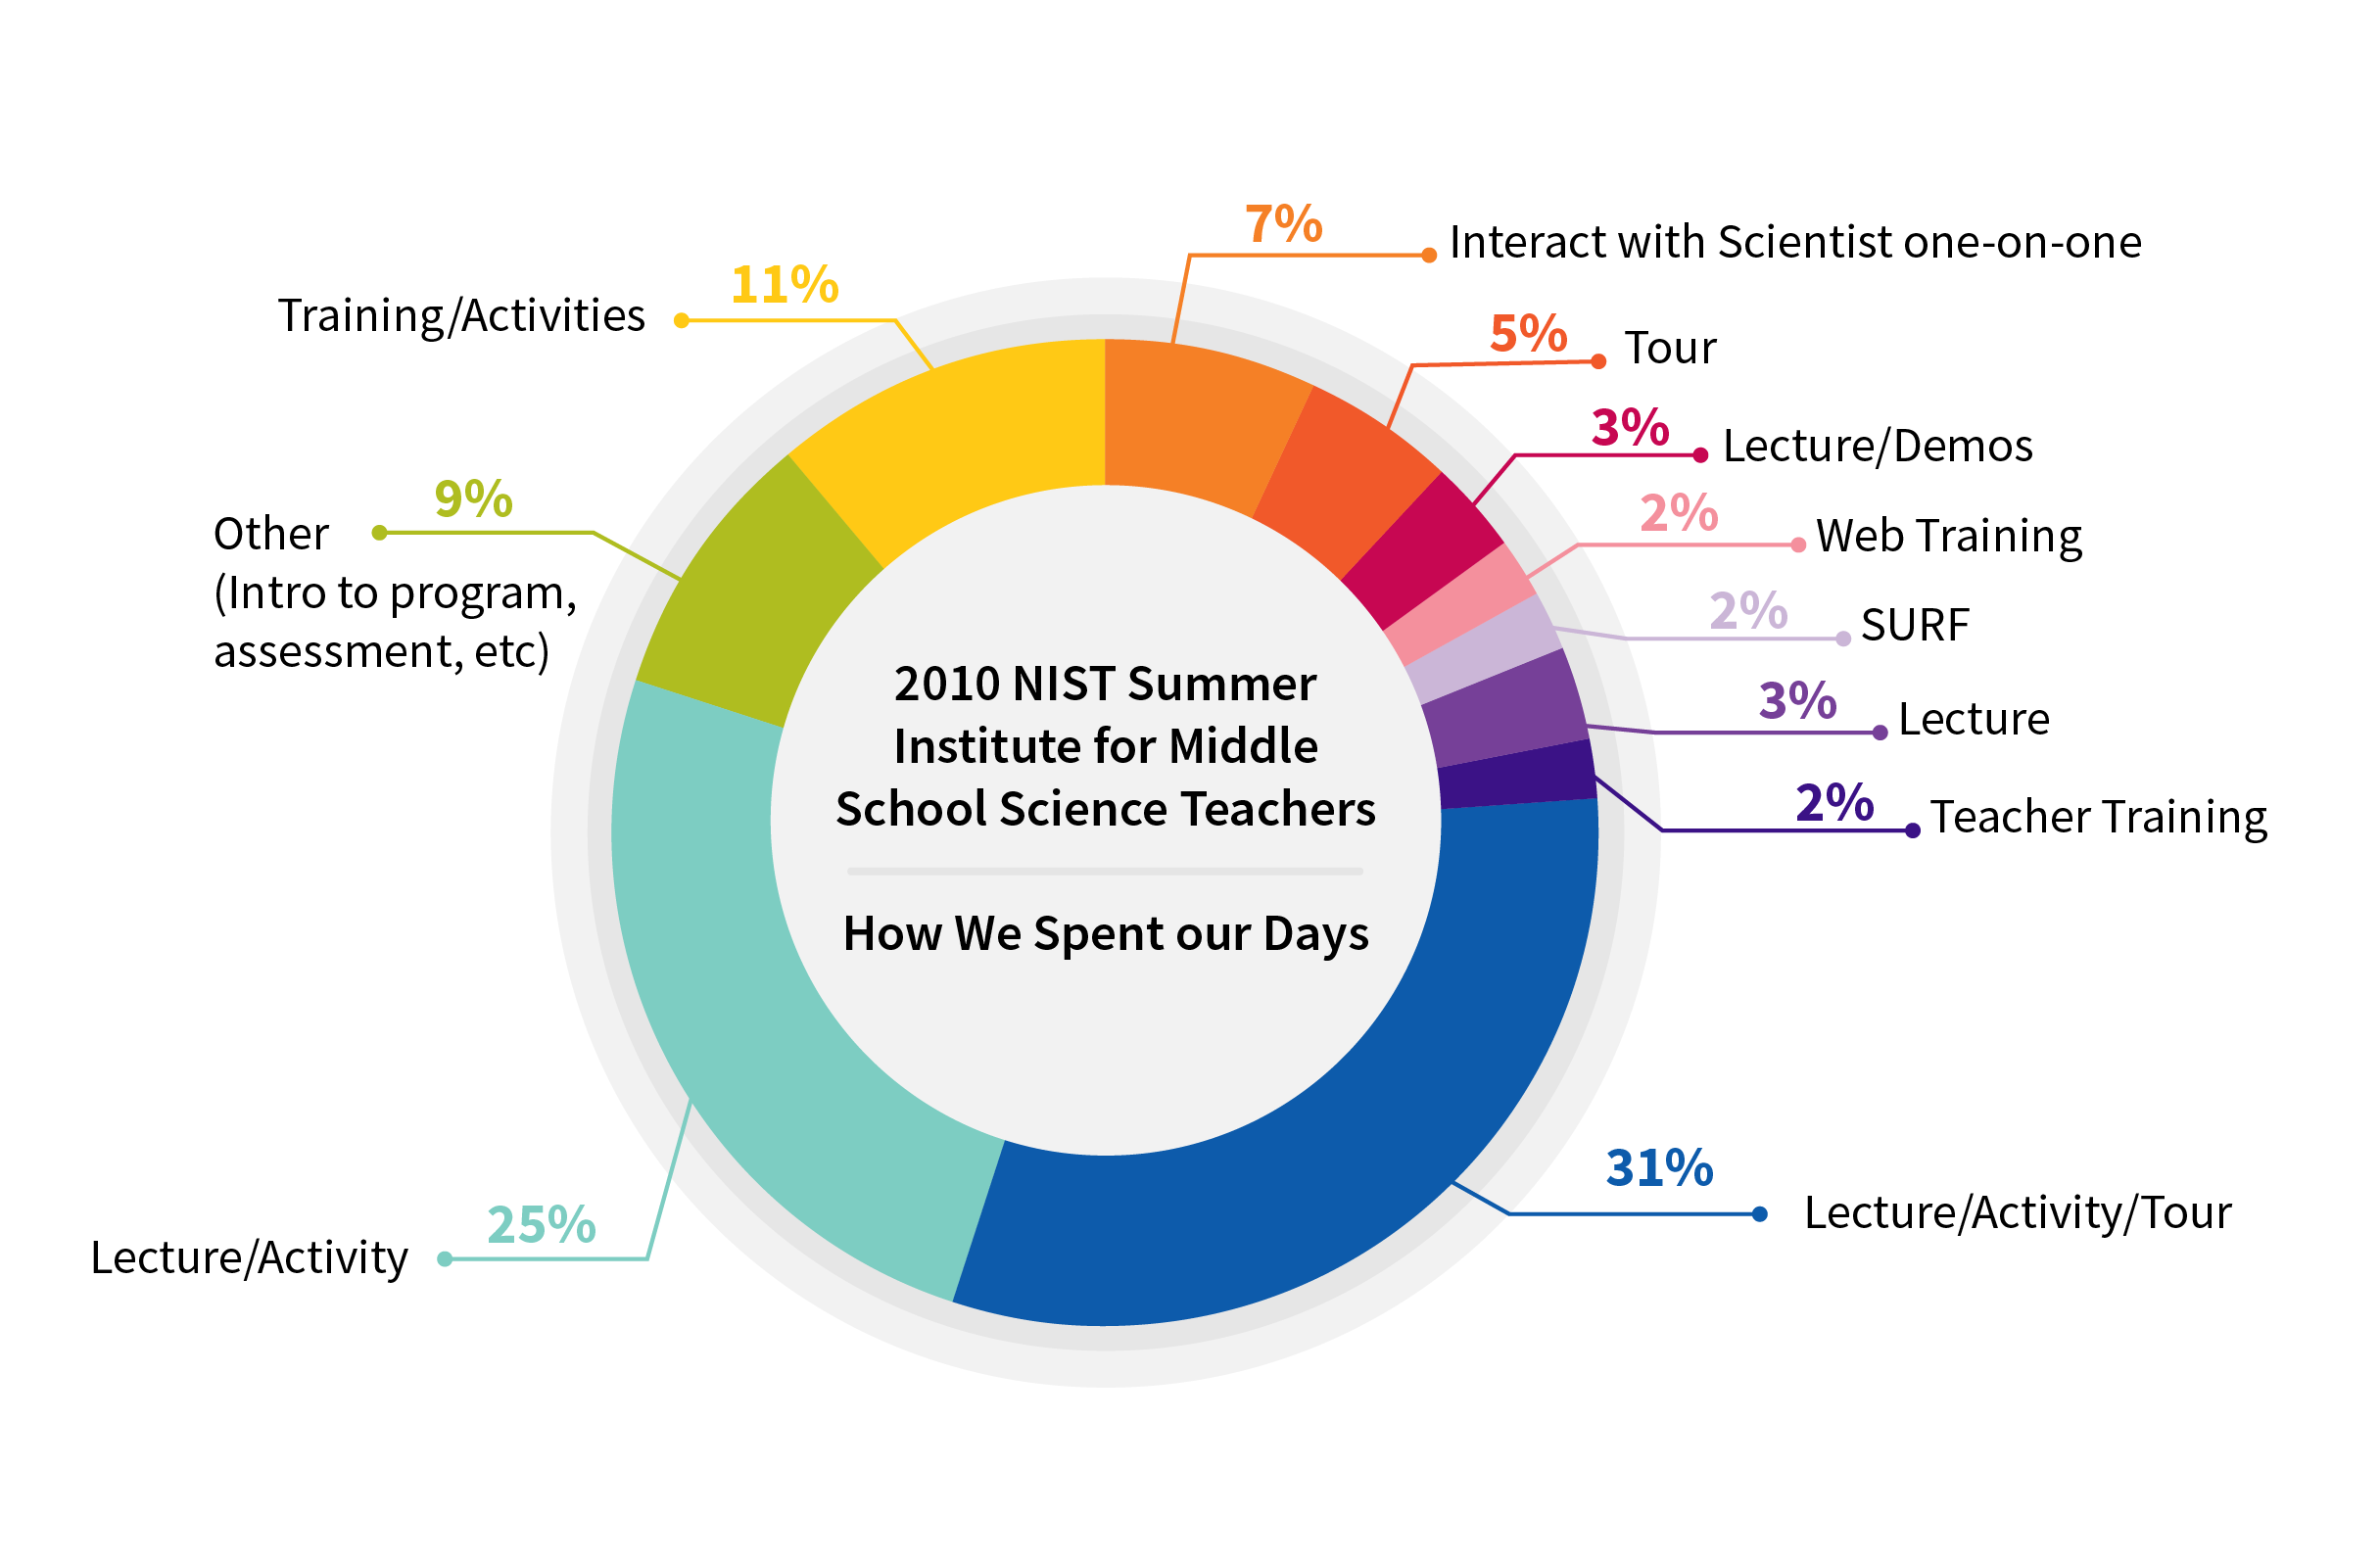 Pie chart showing how summer institute teachers spend their days: 31% lecture/activity/tour; 25% lecture/activity; 11% training/activities; 9% other; 7% one-on-one scientist interaction; 5% tour; 3% lecture/demos; 3% lecture; 2% web training; 2% SURF; and 2% teacher training.